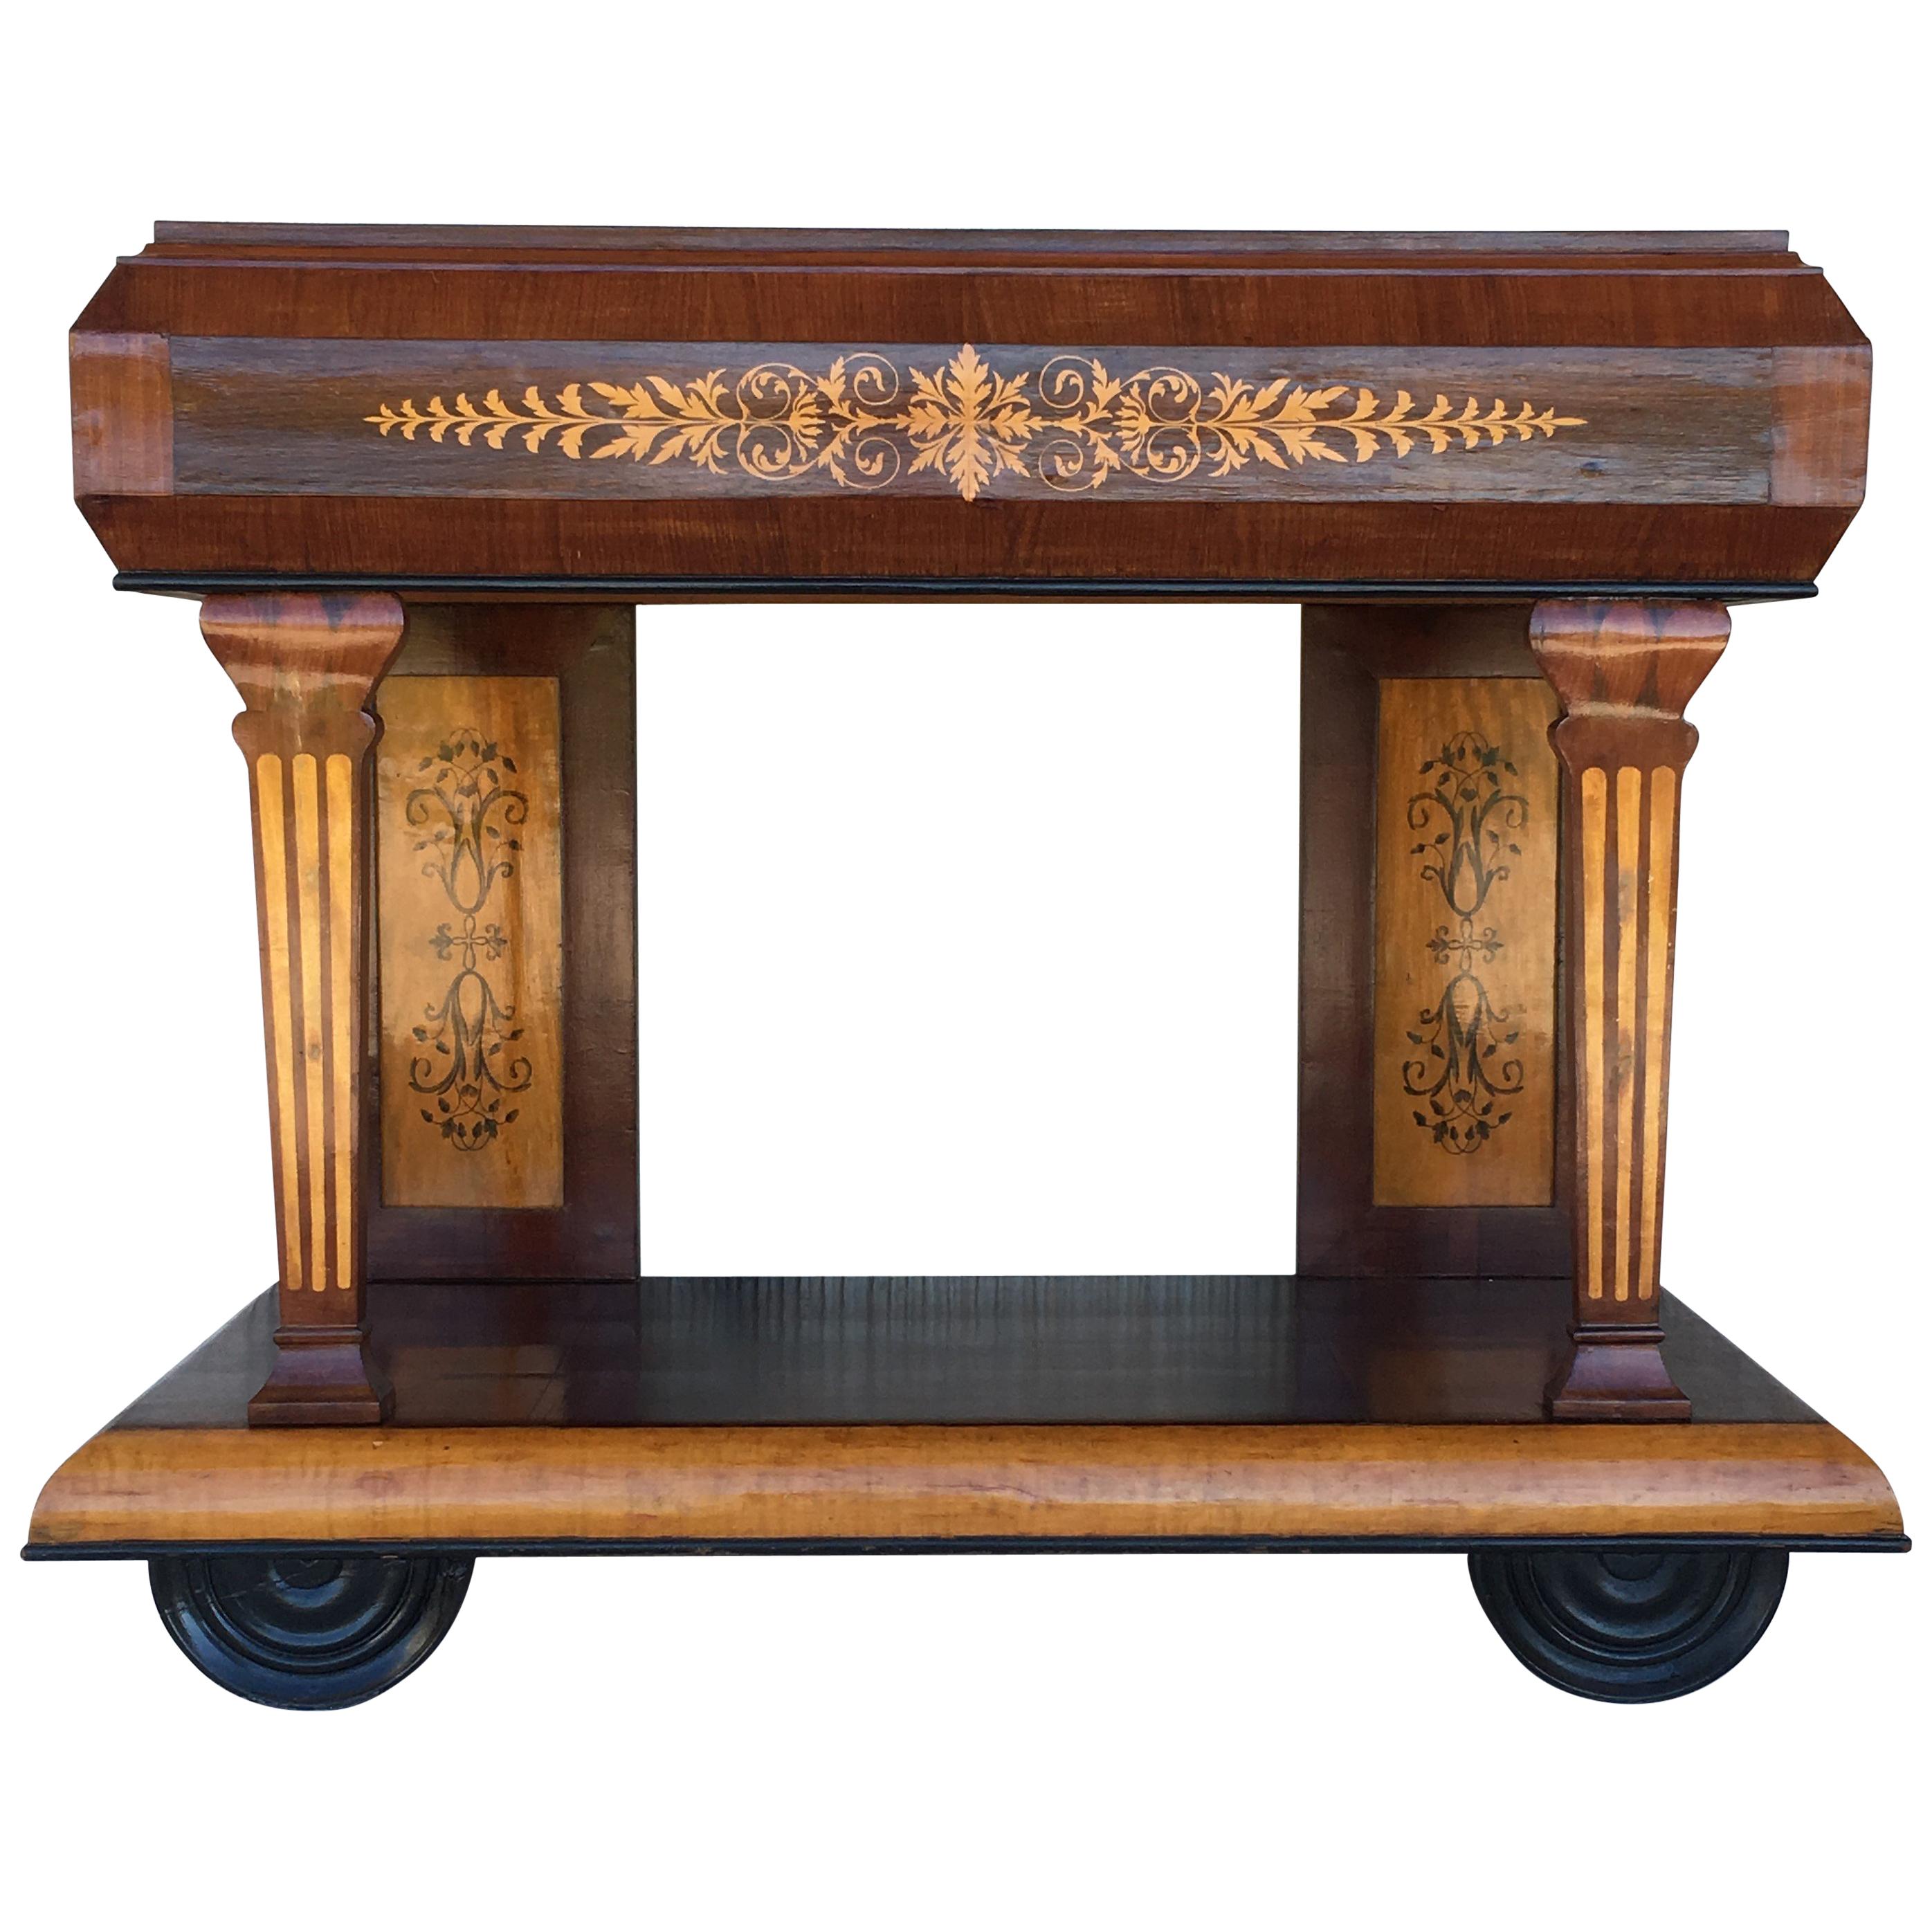 1830s French Empire Marquetry Console Table in Rosewood and Maple For Sale